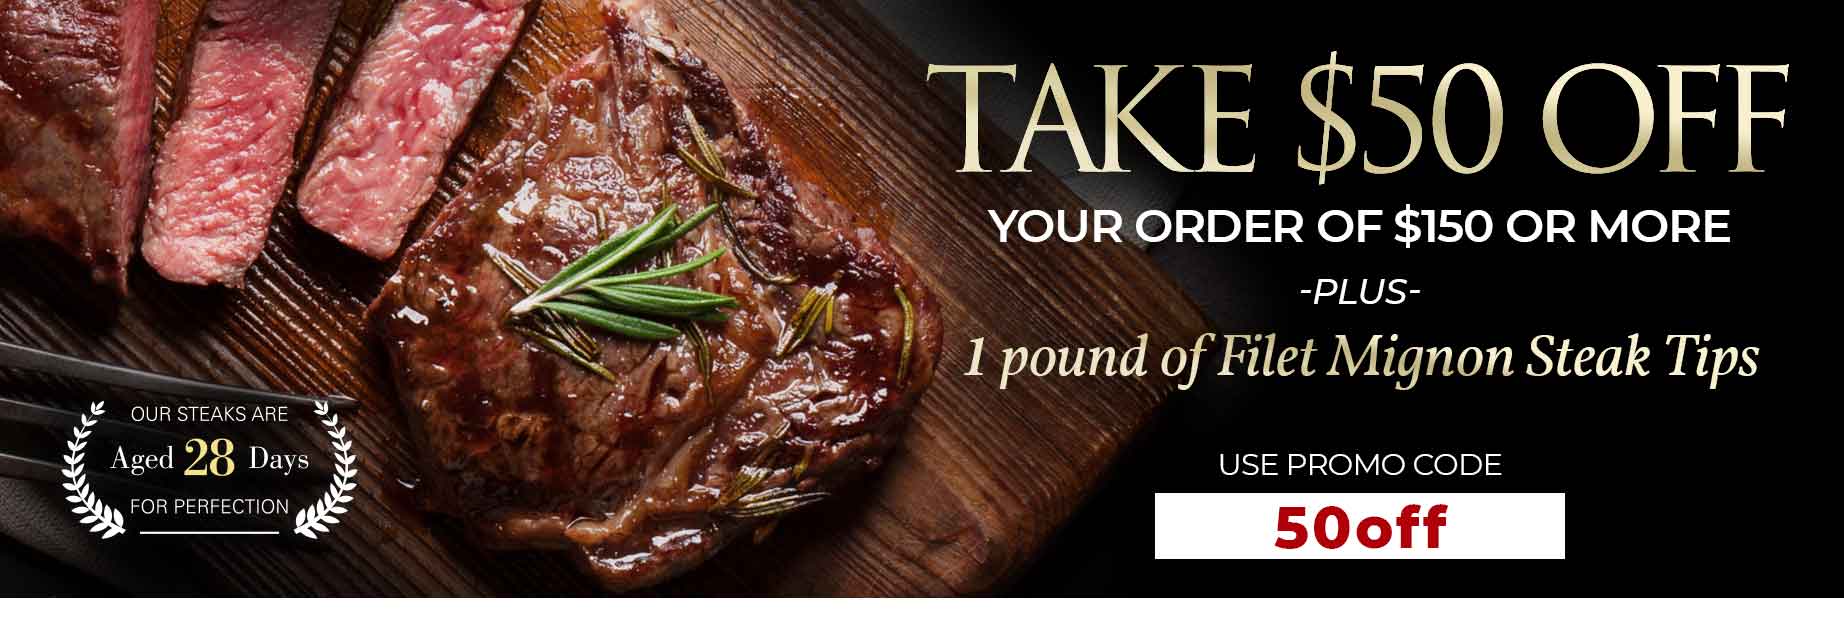 Limited Time Offer - $50 Off Plus FREE 1LB of Filet Mignon Steak Tips on Orders $150+ use Promo code: 50off